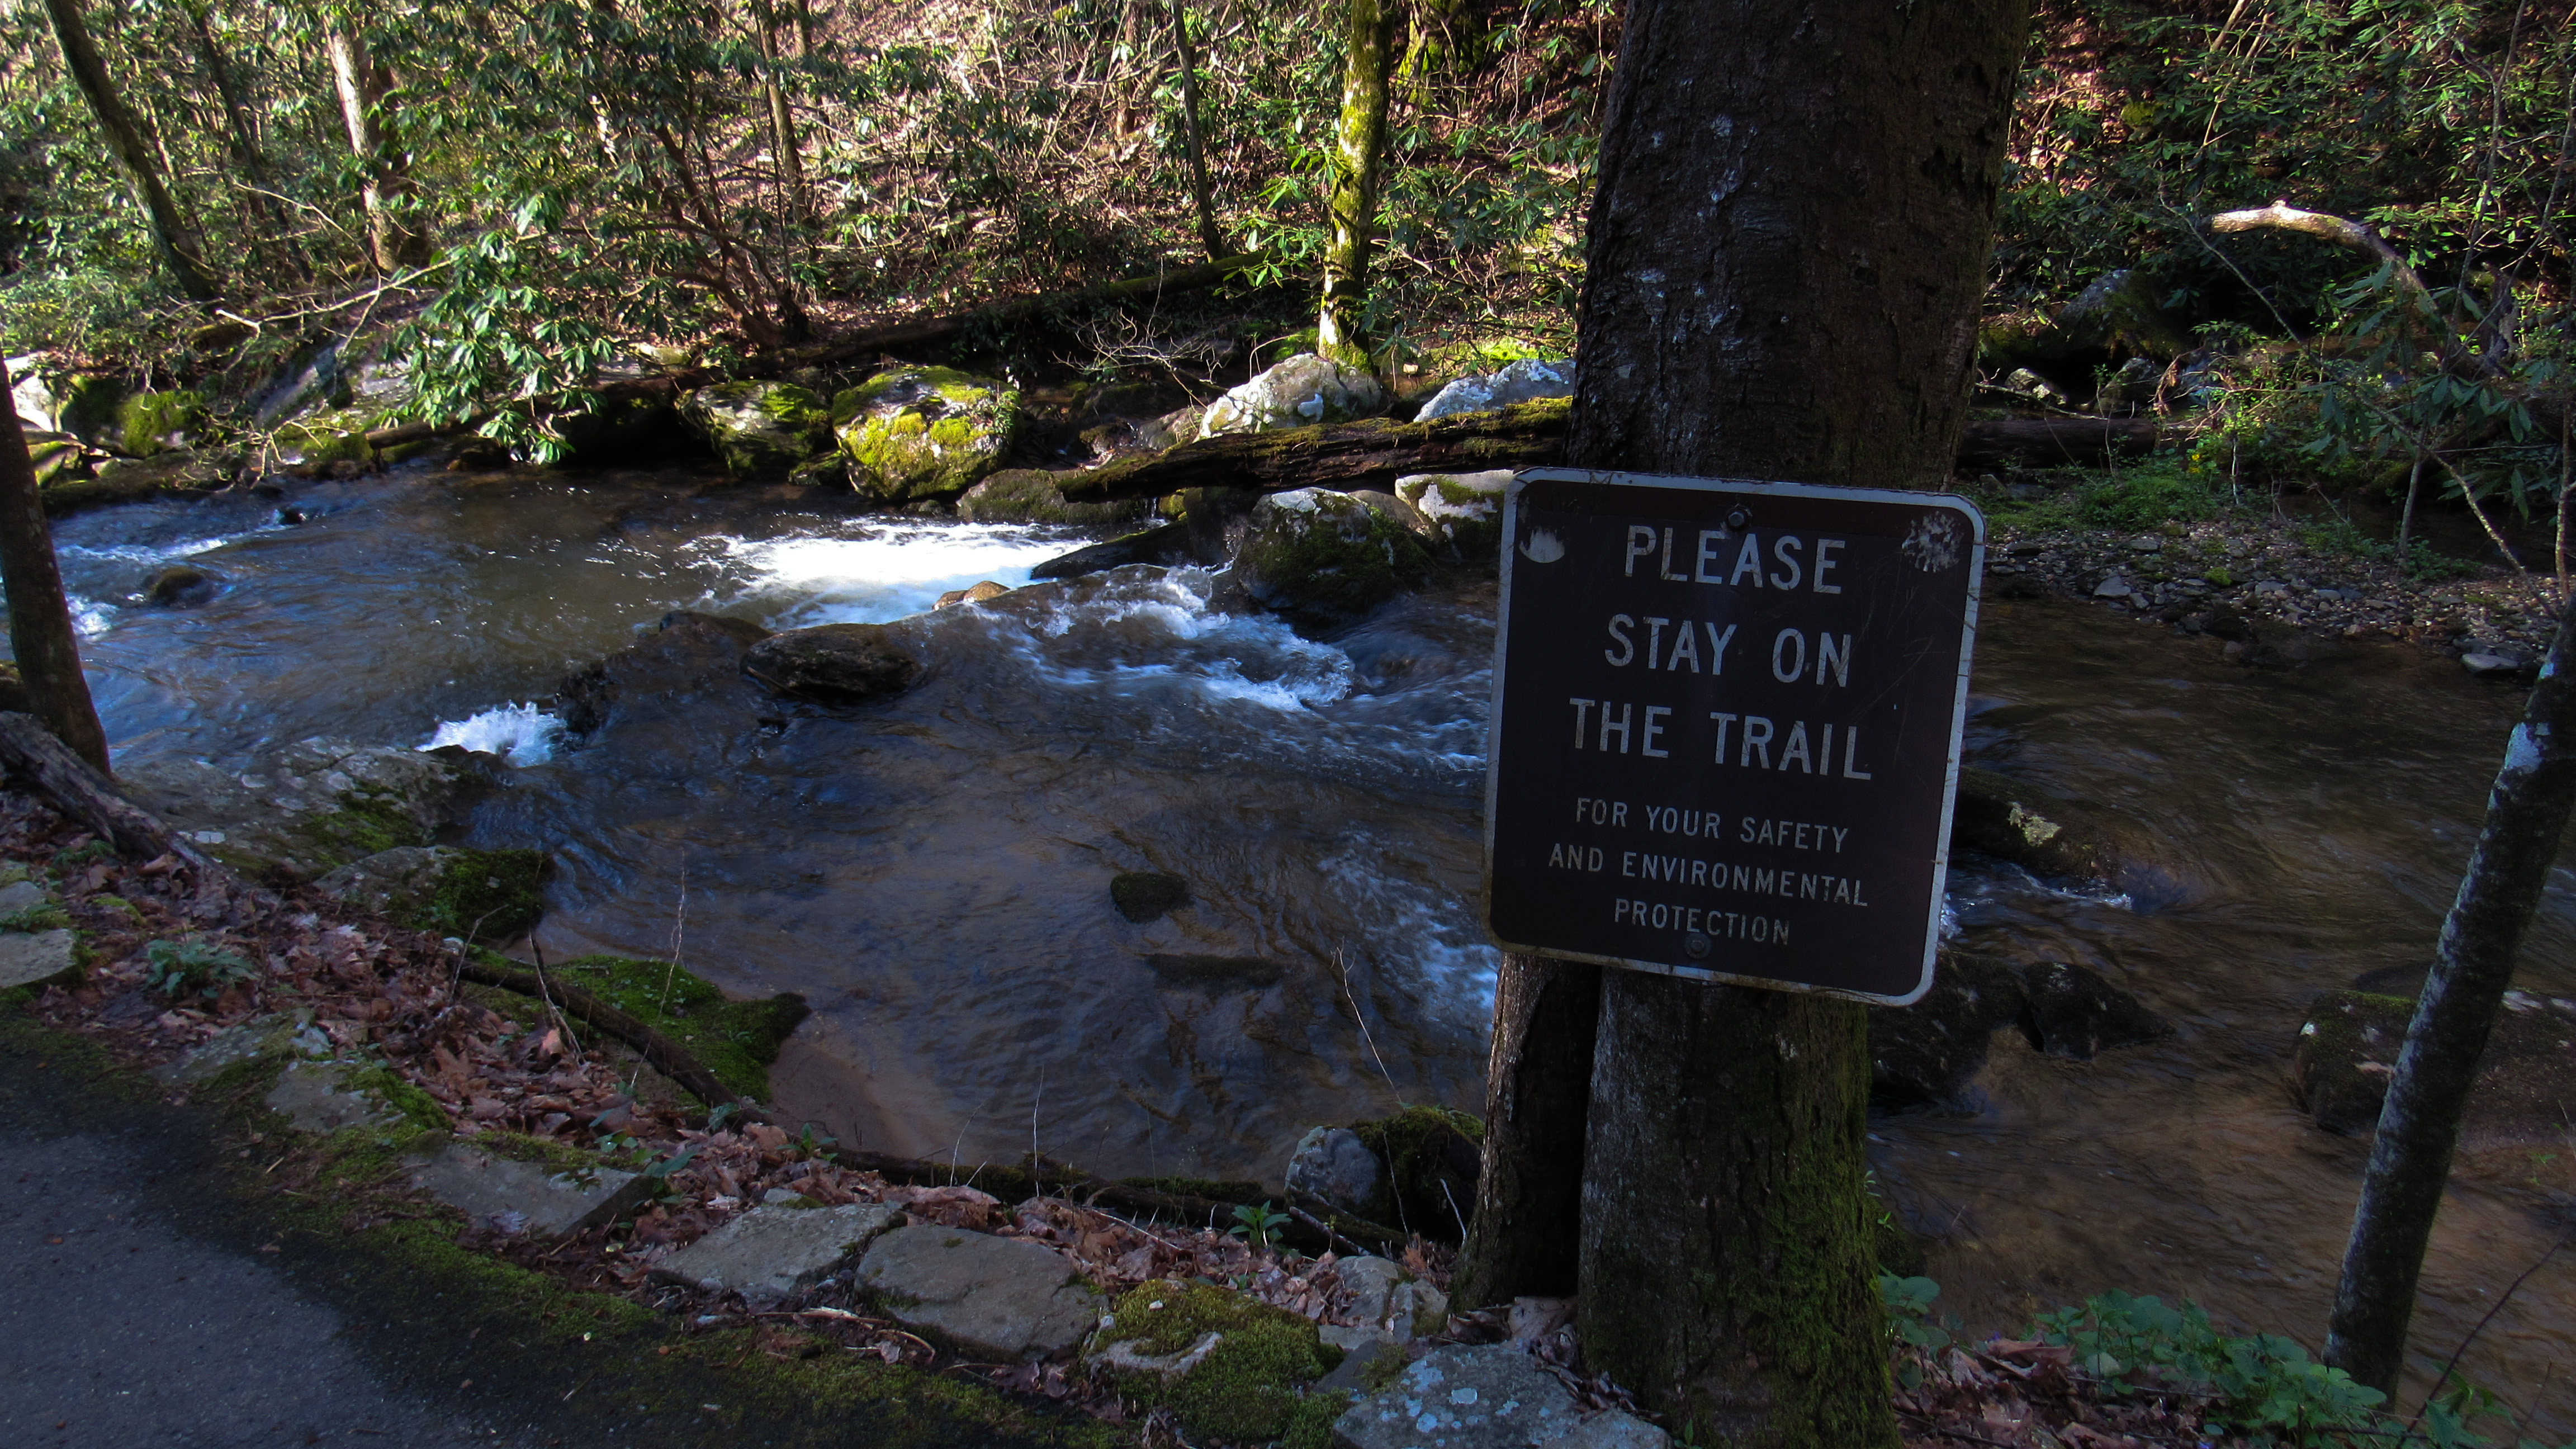 They do keep you close to the water for this briefest of hikes.